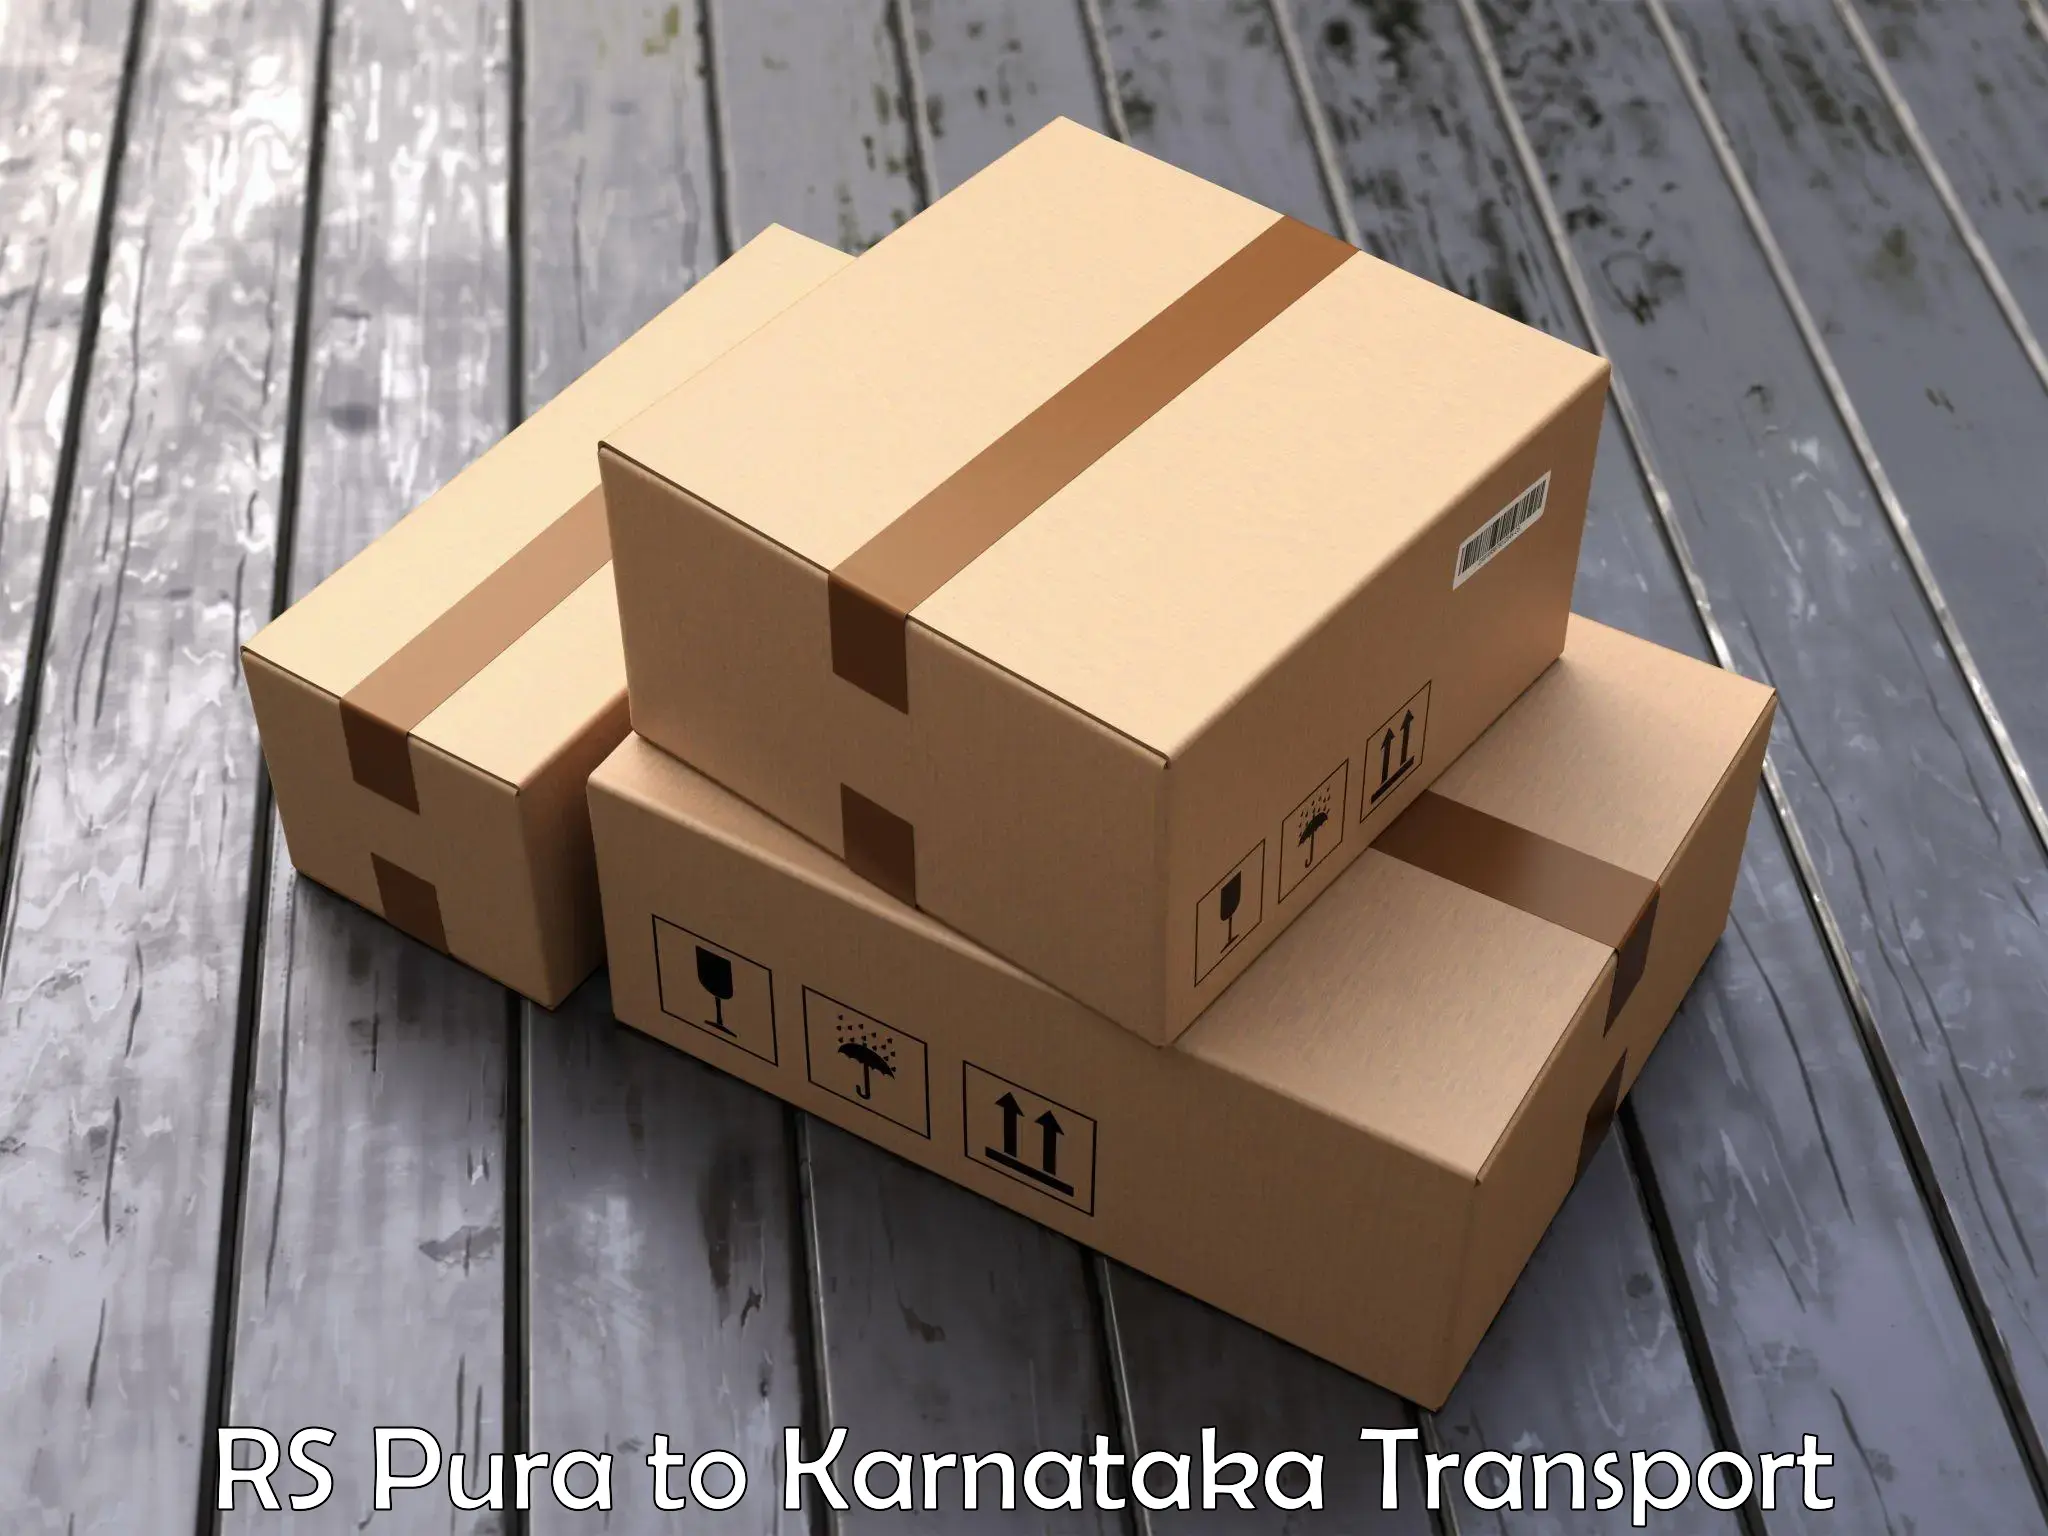 Truck transport companies in India in RS Pura to Chikmagalur